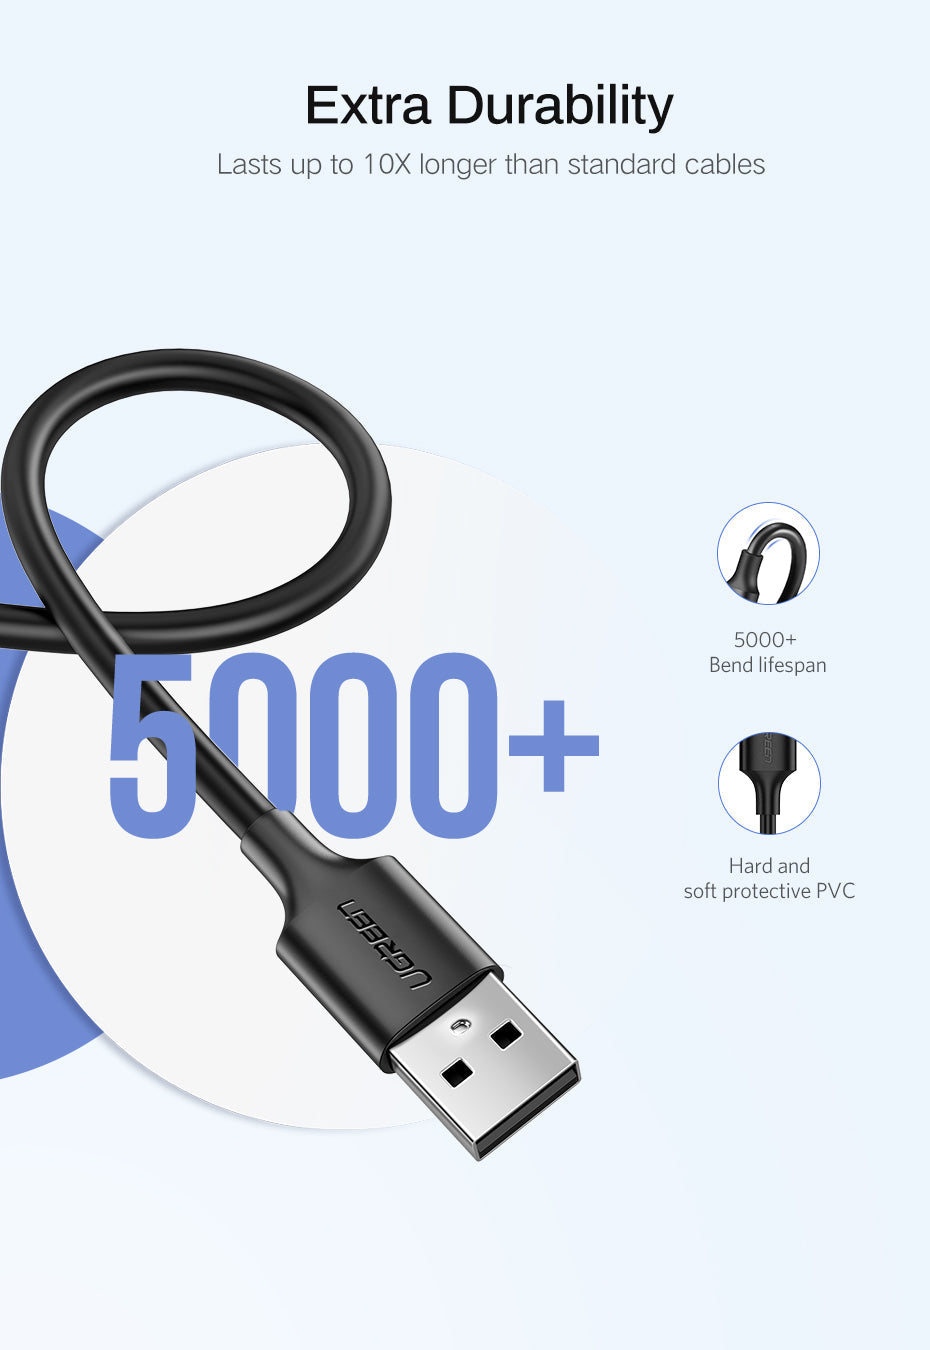 UGREEN USB 2.0A TO MICRO USB CABLE  NICKEL PLATING 1M - Black